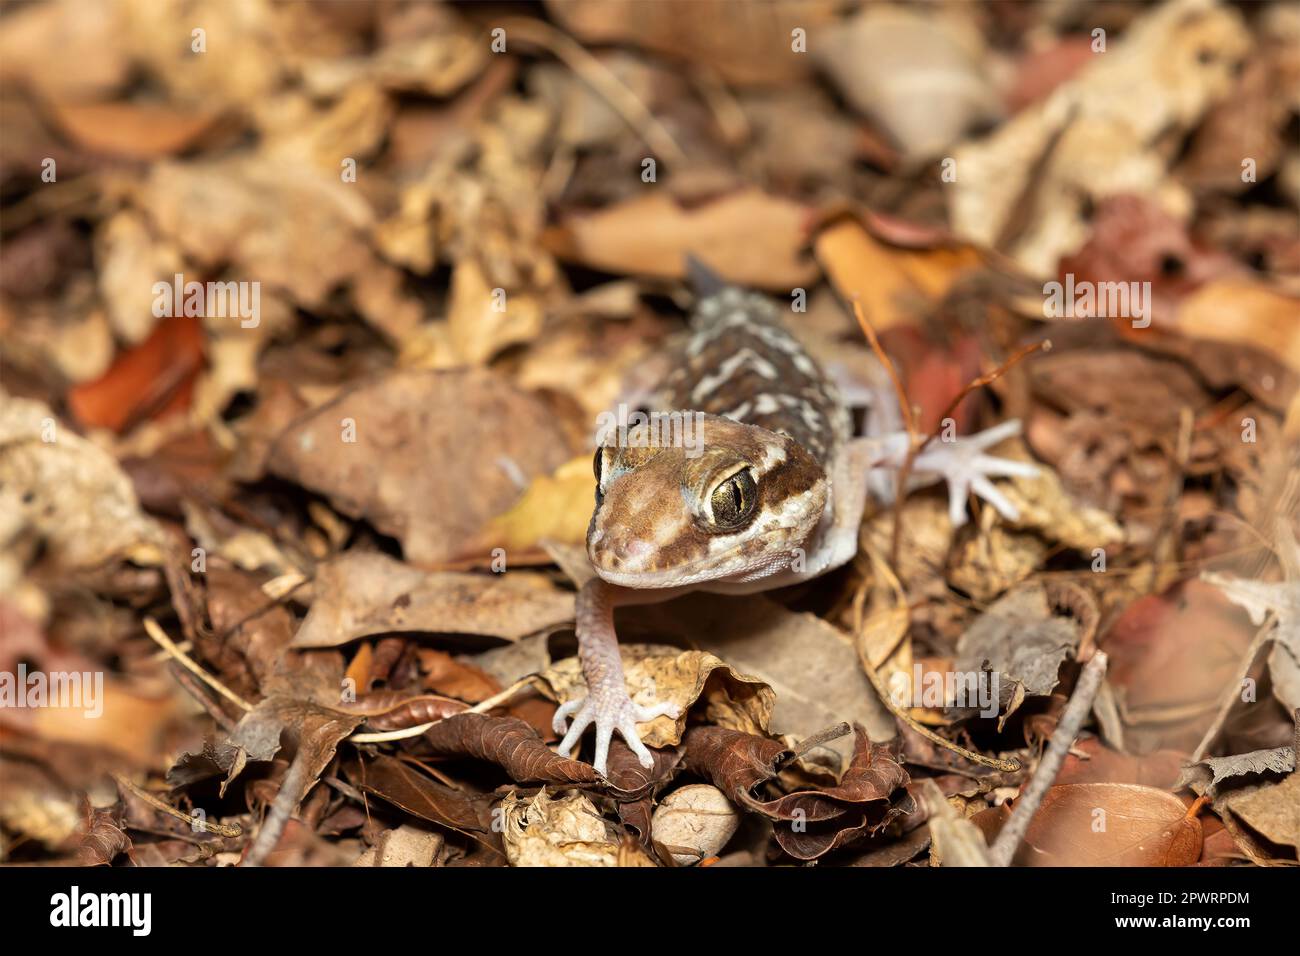 Small Lizard, Ocelot gecko (Paroedura picta) is a crepuscular endemic ground-dwelling gecko found in leaf litter in Madagascar forests, Kirindy Forest Stock Photo